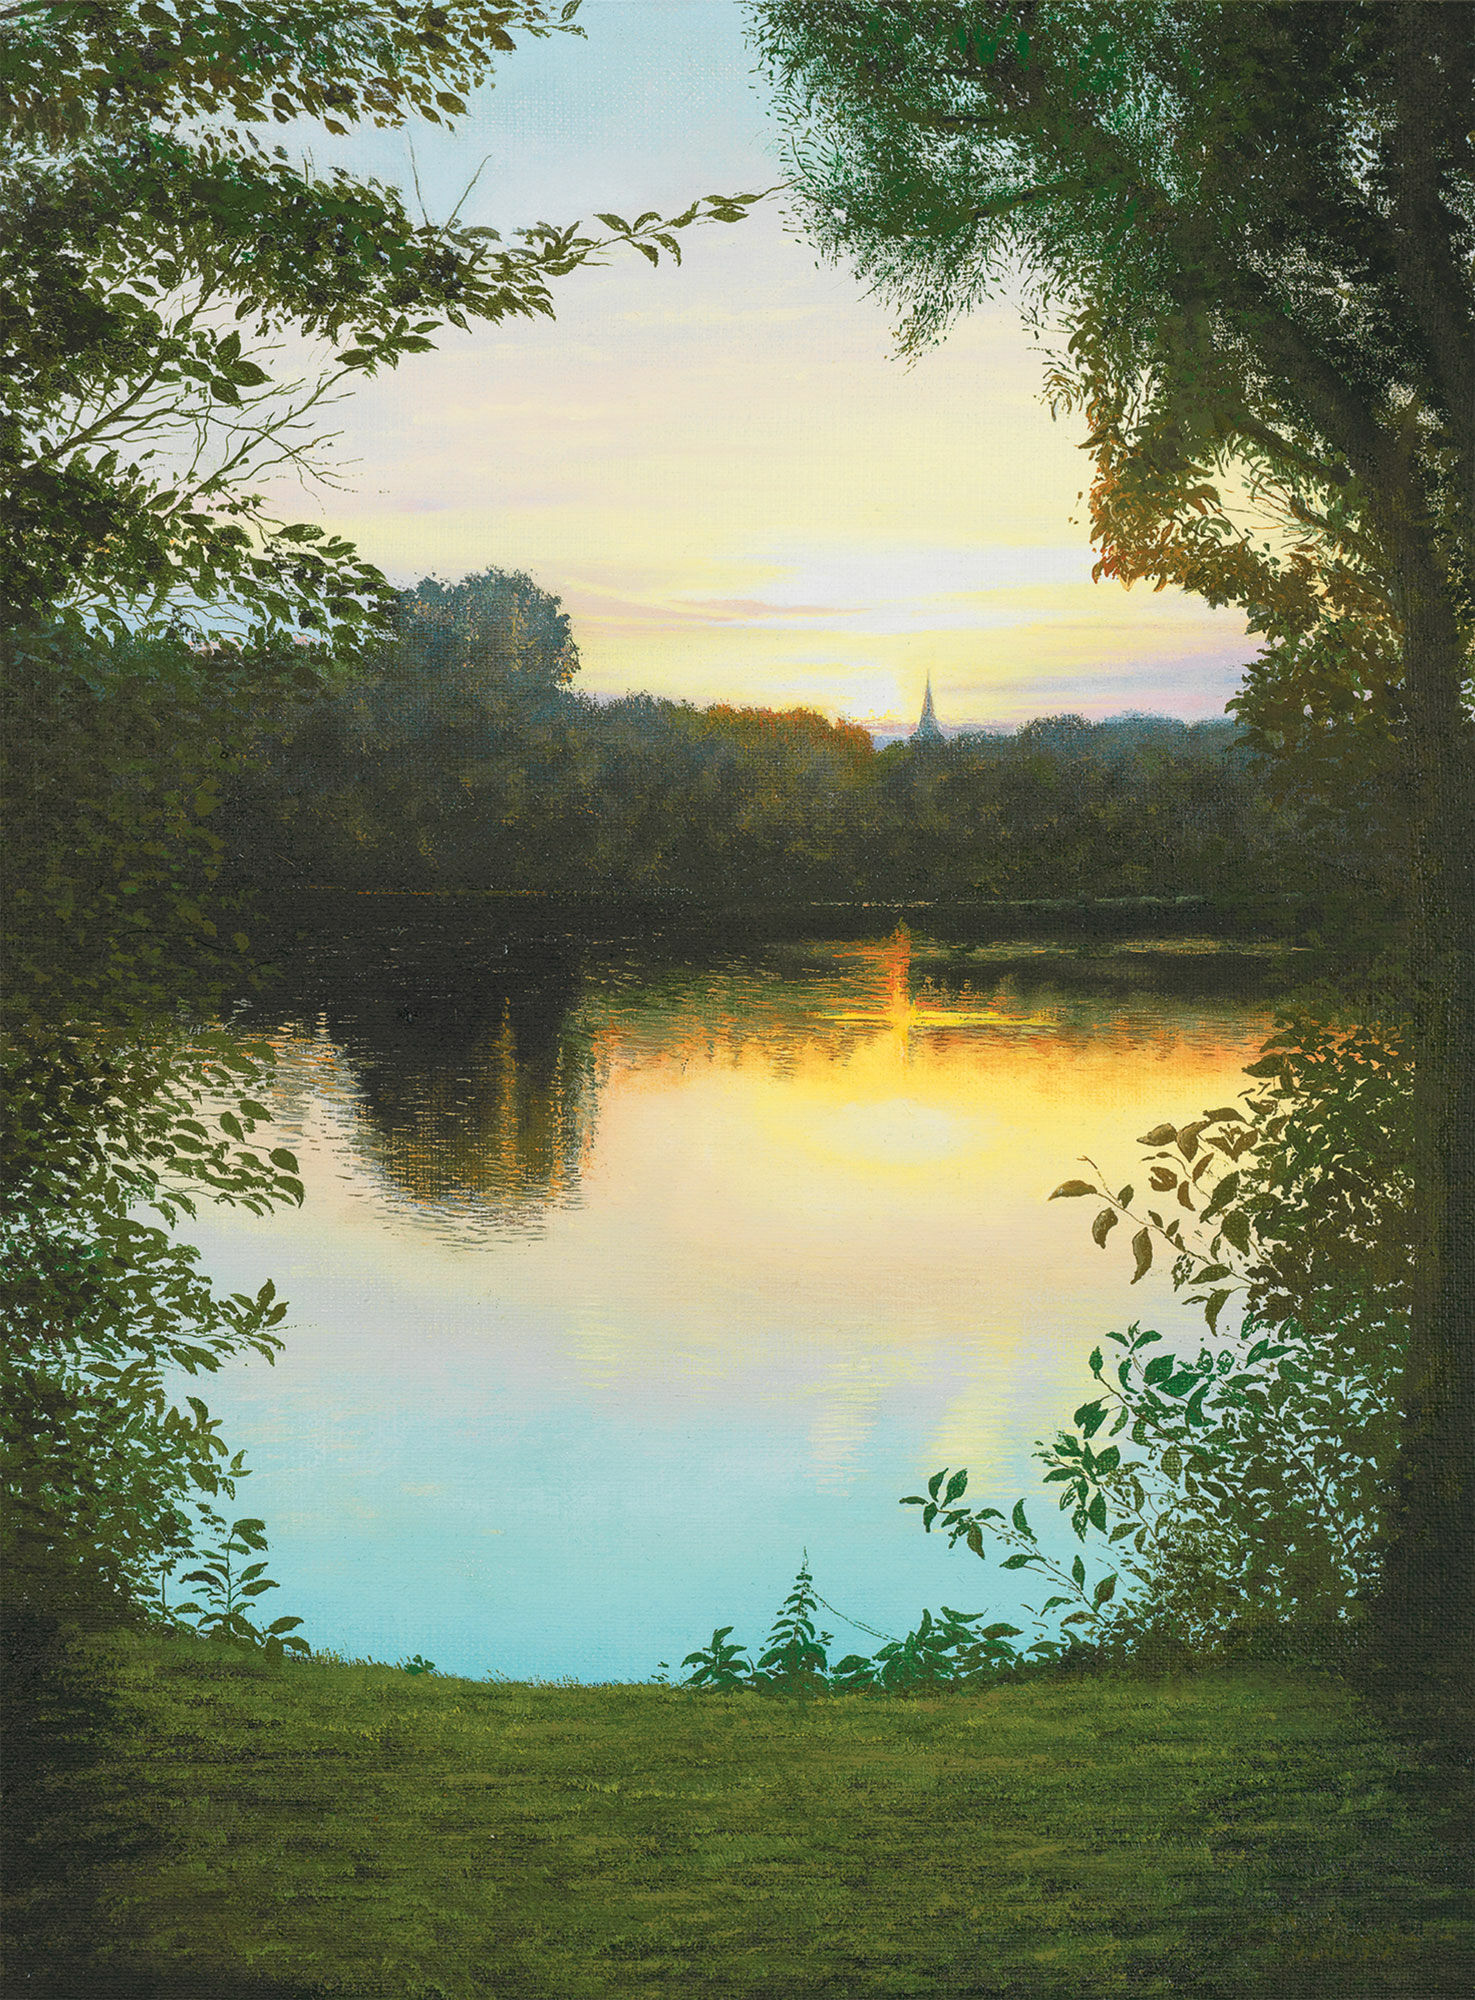 Picture "Evening at Lago Laprello", on stretcher frame by Leo Windeln